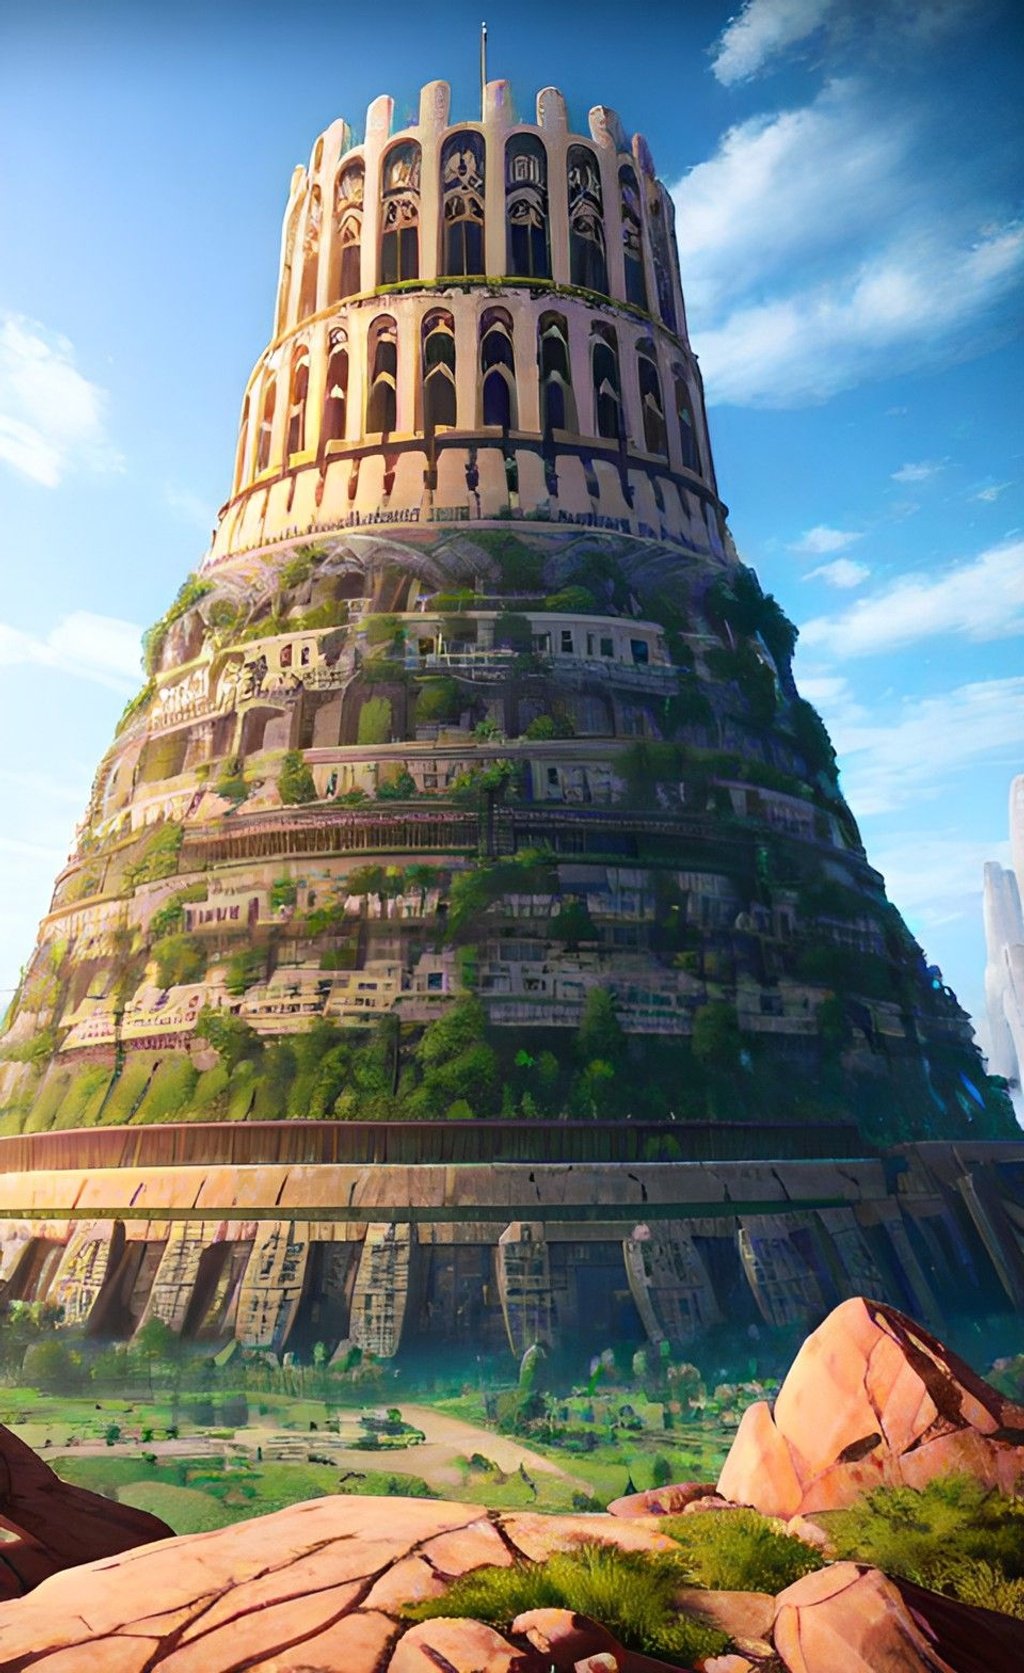 Prompt: "Witness the magnificent Tower of Babel like never before, as you embark on an extraordinary midjourney through the power of Unreal Engine's hyper-realistic graphics. Describe the minute details and lifelike textures that make this virtual encounter so captivating."